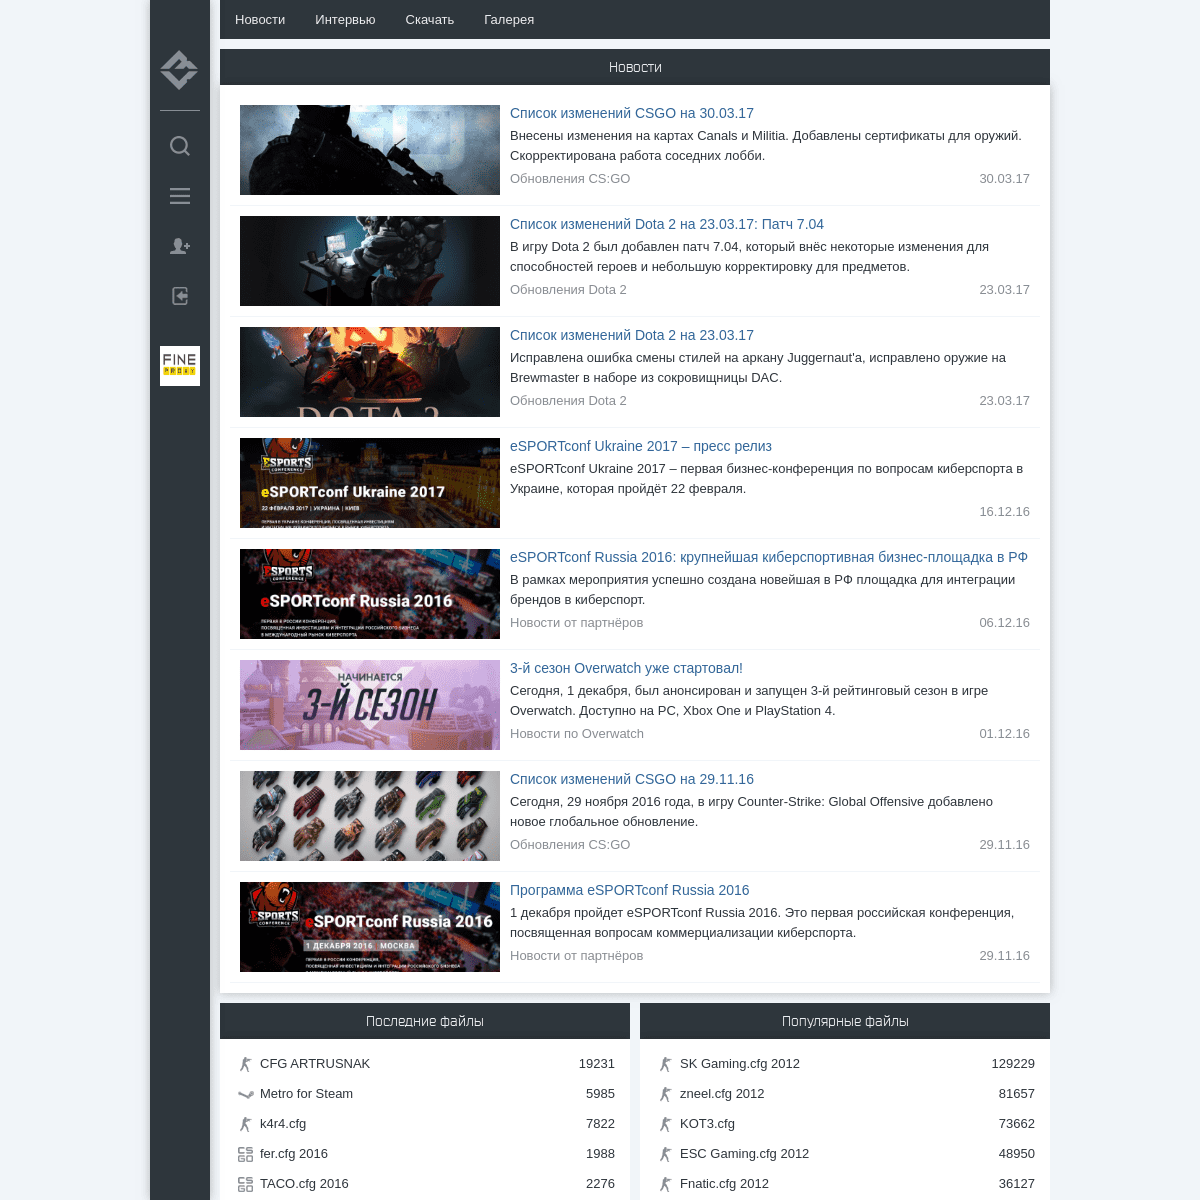 A complete backup of cyberfrags.com